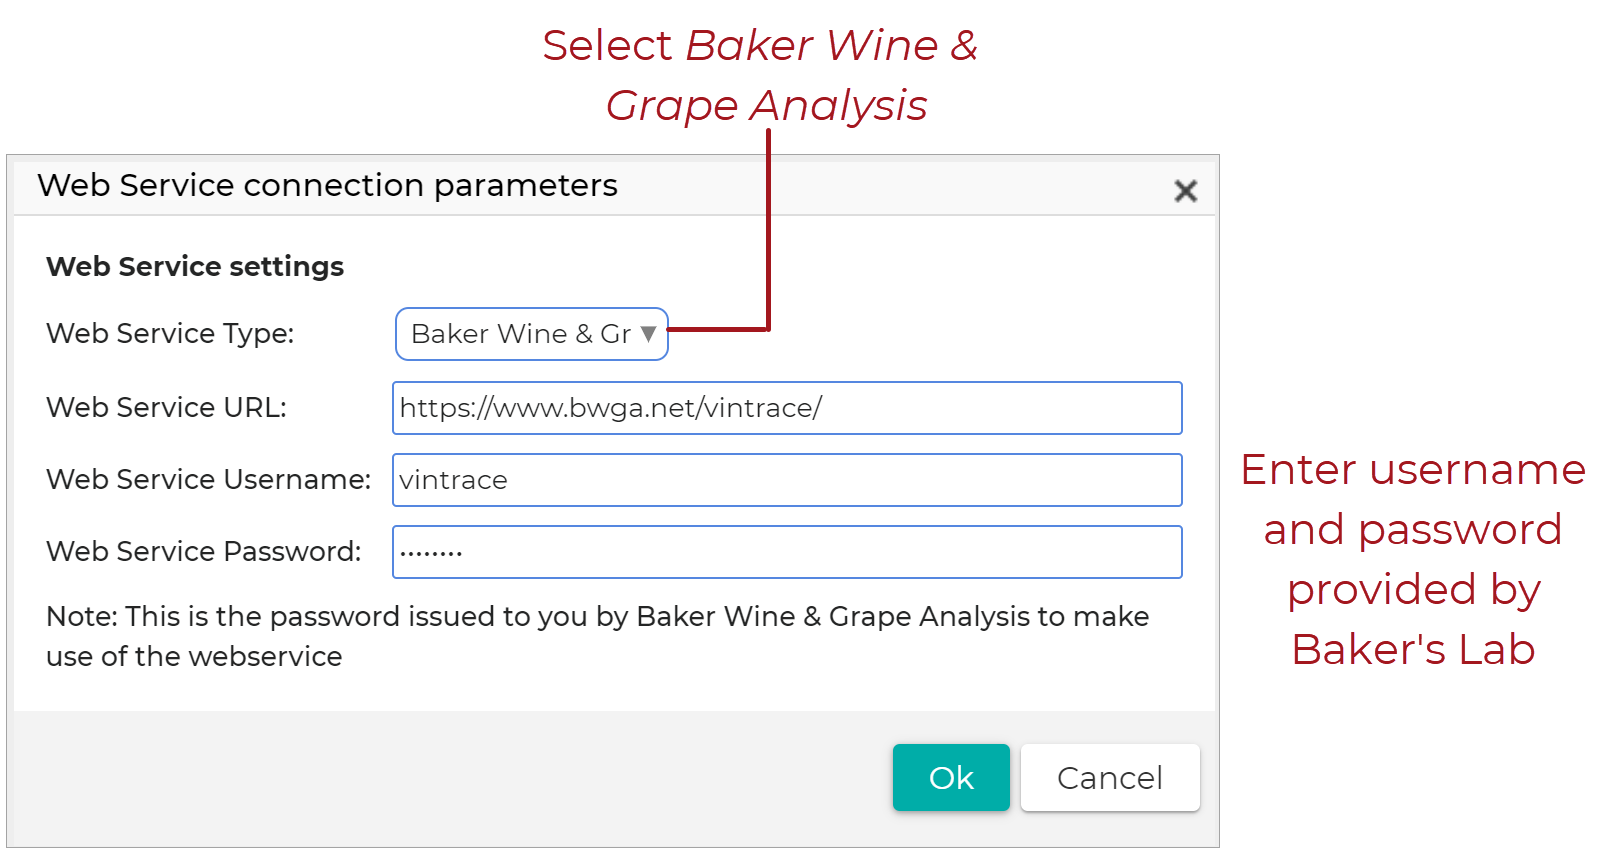 Web_Service_Connection_Parameters_-_Bakers_Lab_20201203.png